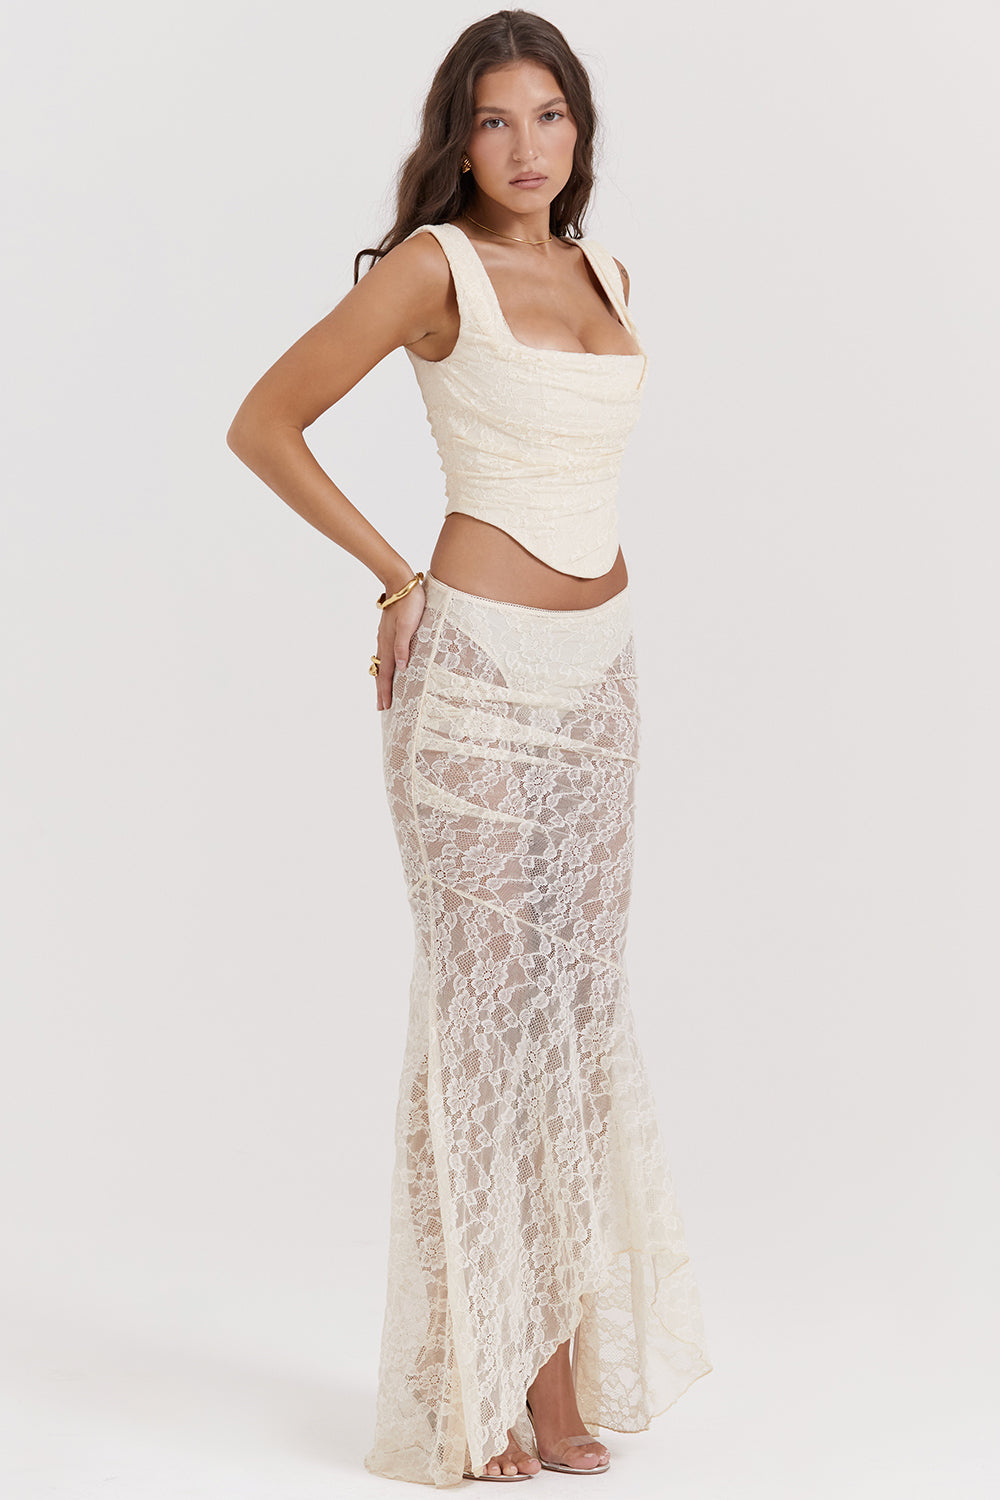 Hire HOUSE OF CB Set Therese Vintage Cream Lace Maxi Skirt and Una Corset Top in Cream